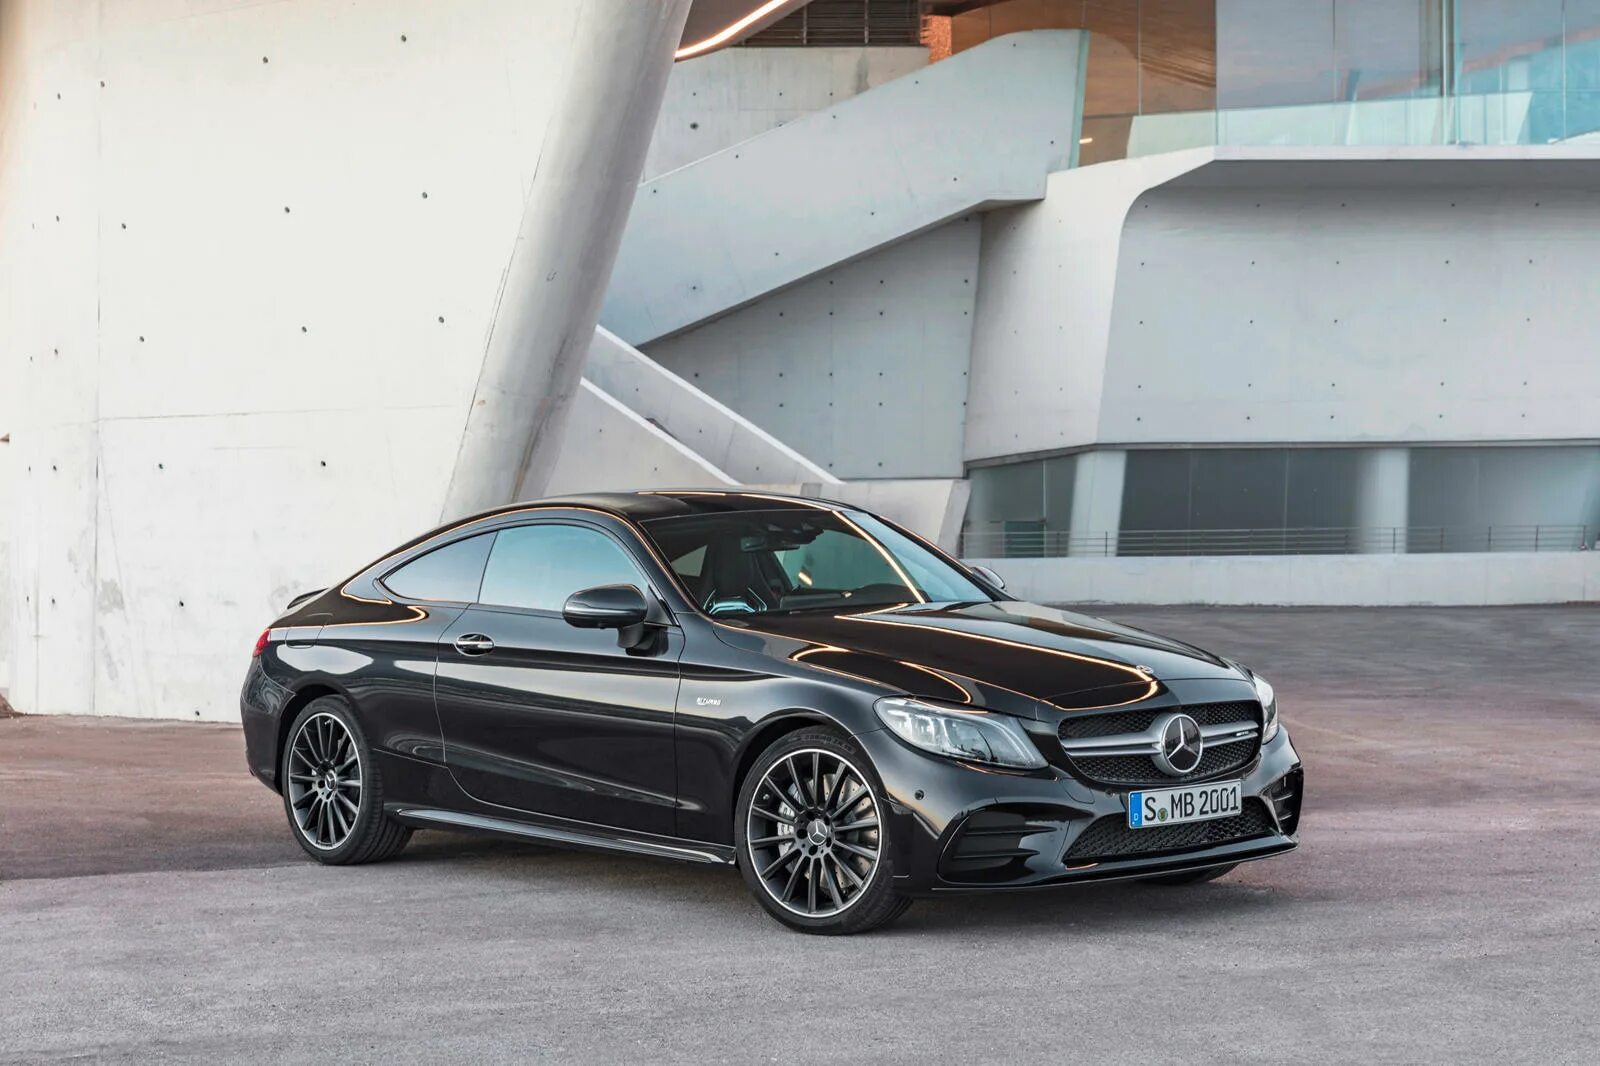 Мерседес c43 AMG. C43 AMG Coupe. Mercedes c AMG 43 2019. Мерседес c43 AMG Coupe. Mercedes c class coupe